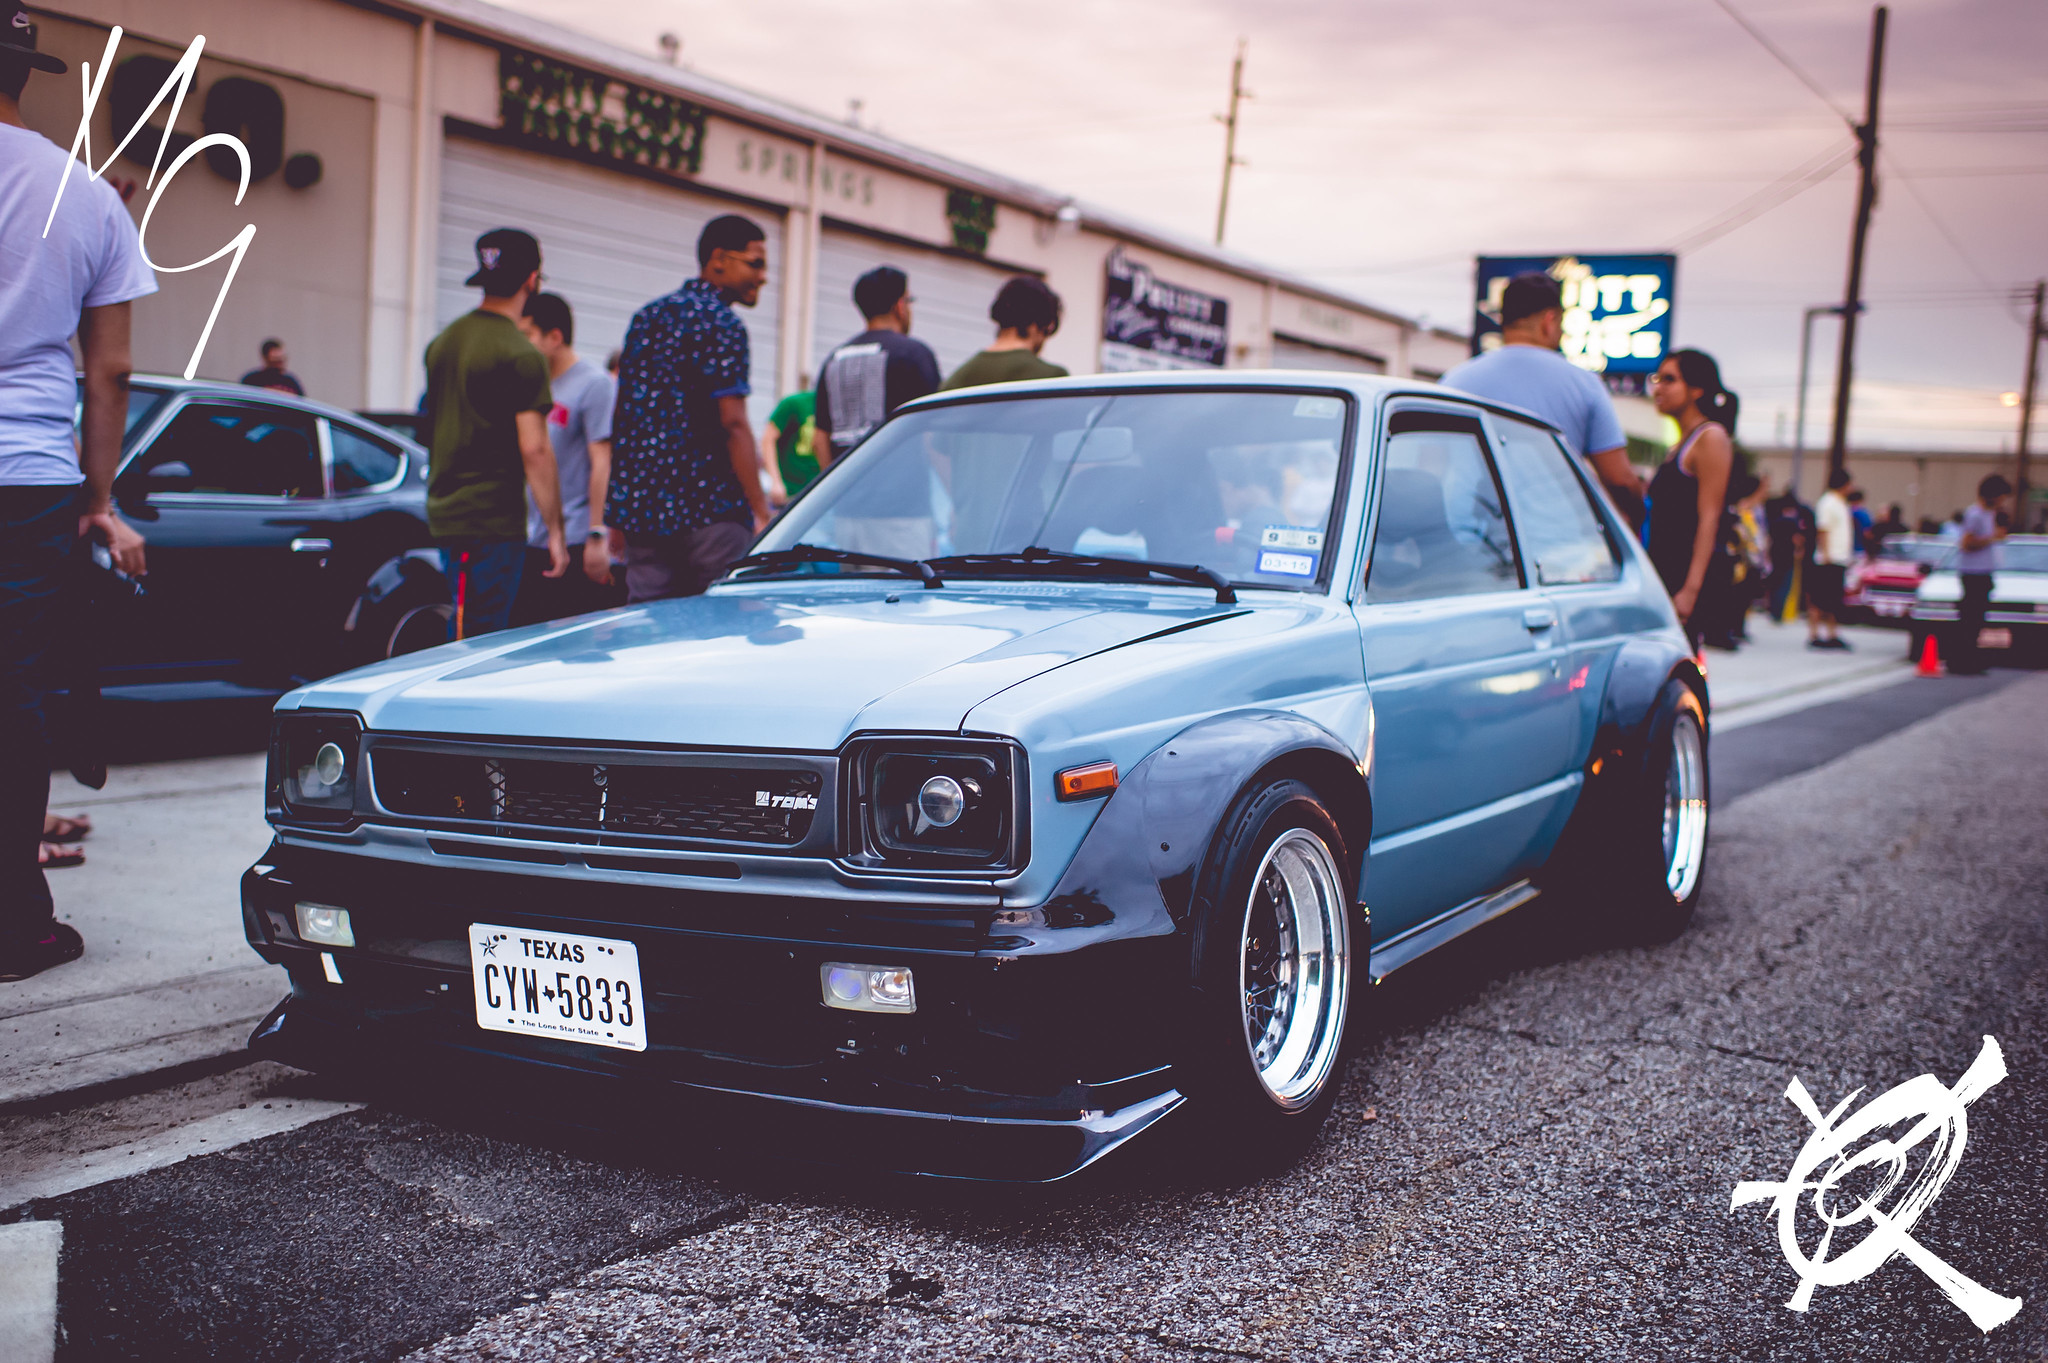 A personal favorite of ours, Edward Morfe's surprise Toyota Starlet had so many gems hidden within his car